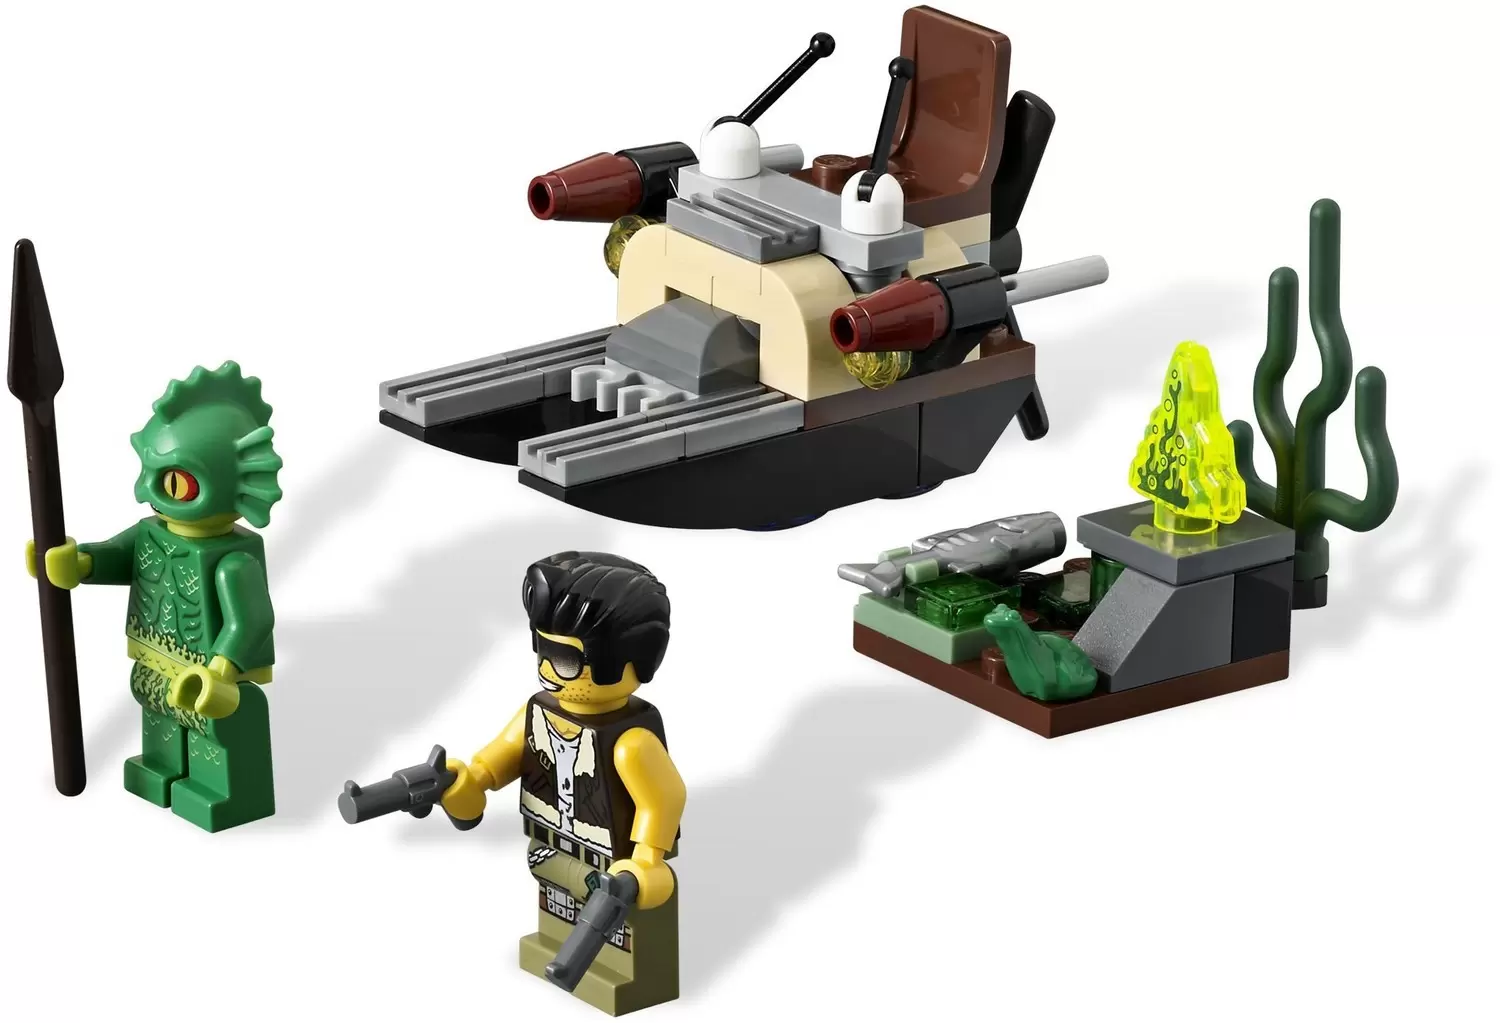 LEGO Monster Fighters - The Swamp Creature